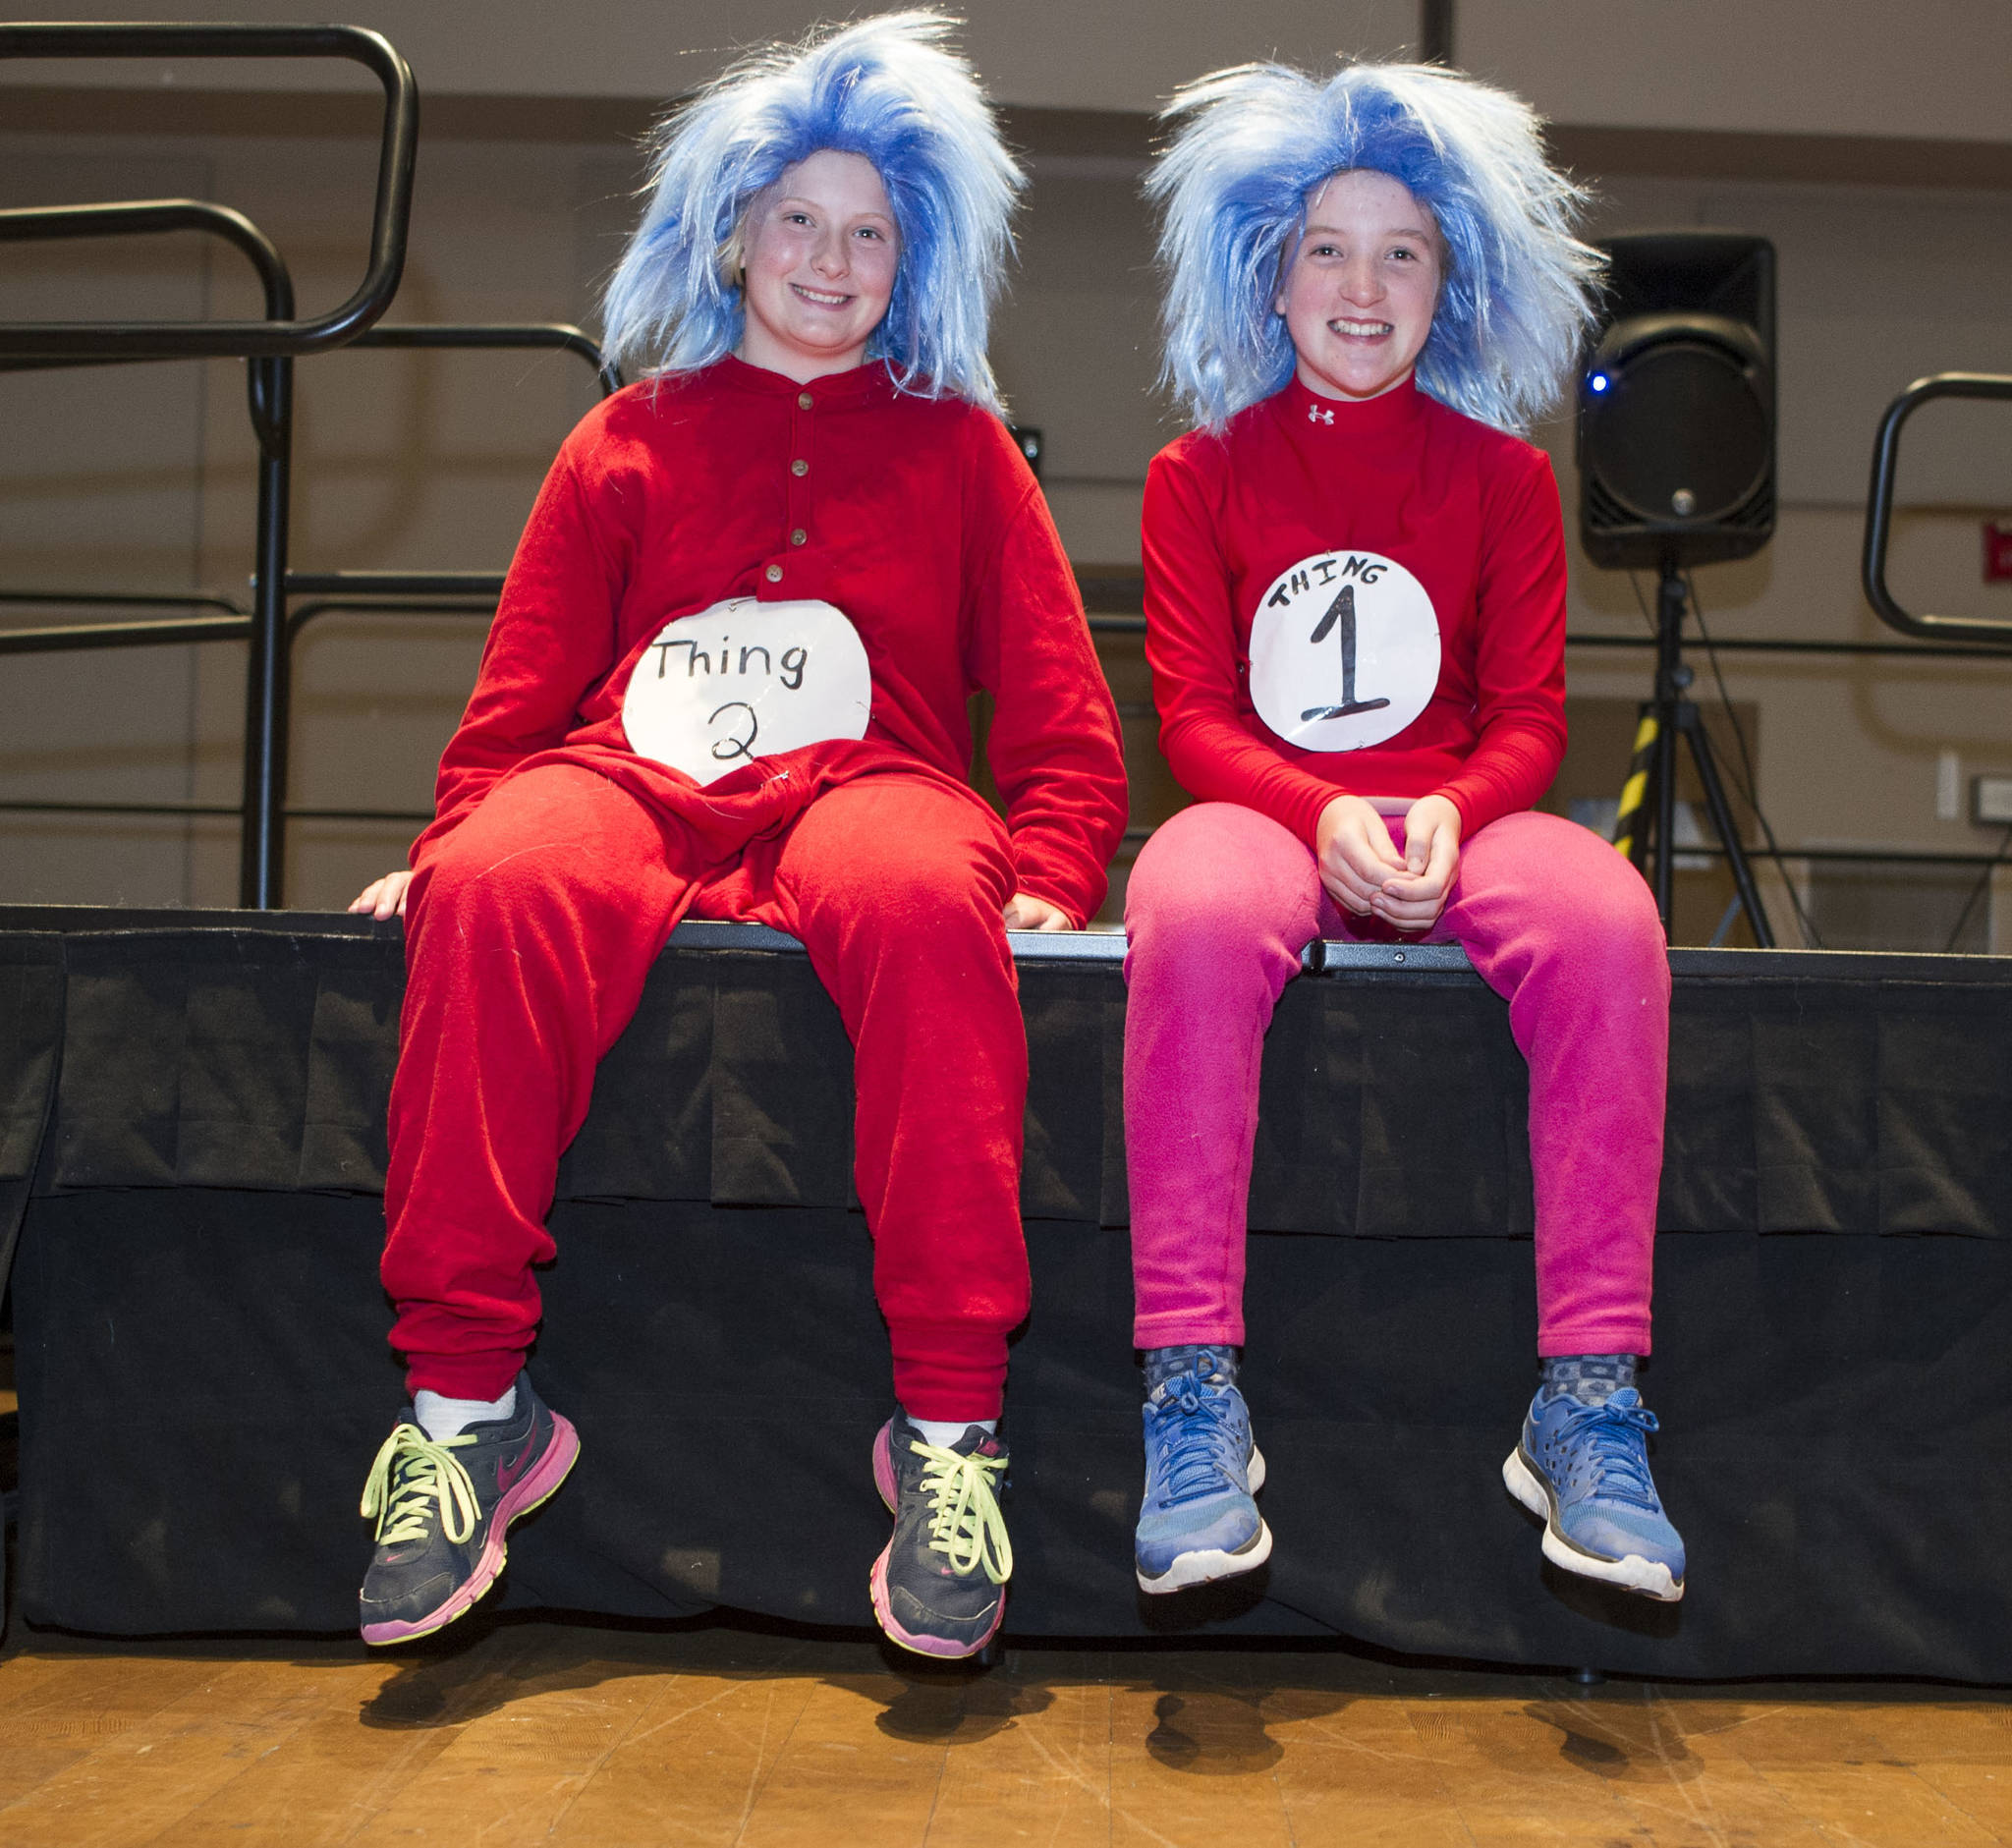 Anna Dale and her friend dress up for the Only Fools Run at Midnight Fun Run in June 2016. The 5K and 1 mile is a fundraiser for KTOO, KXLL, KRNN radio. (Michael Penn | Juneau Empire File)